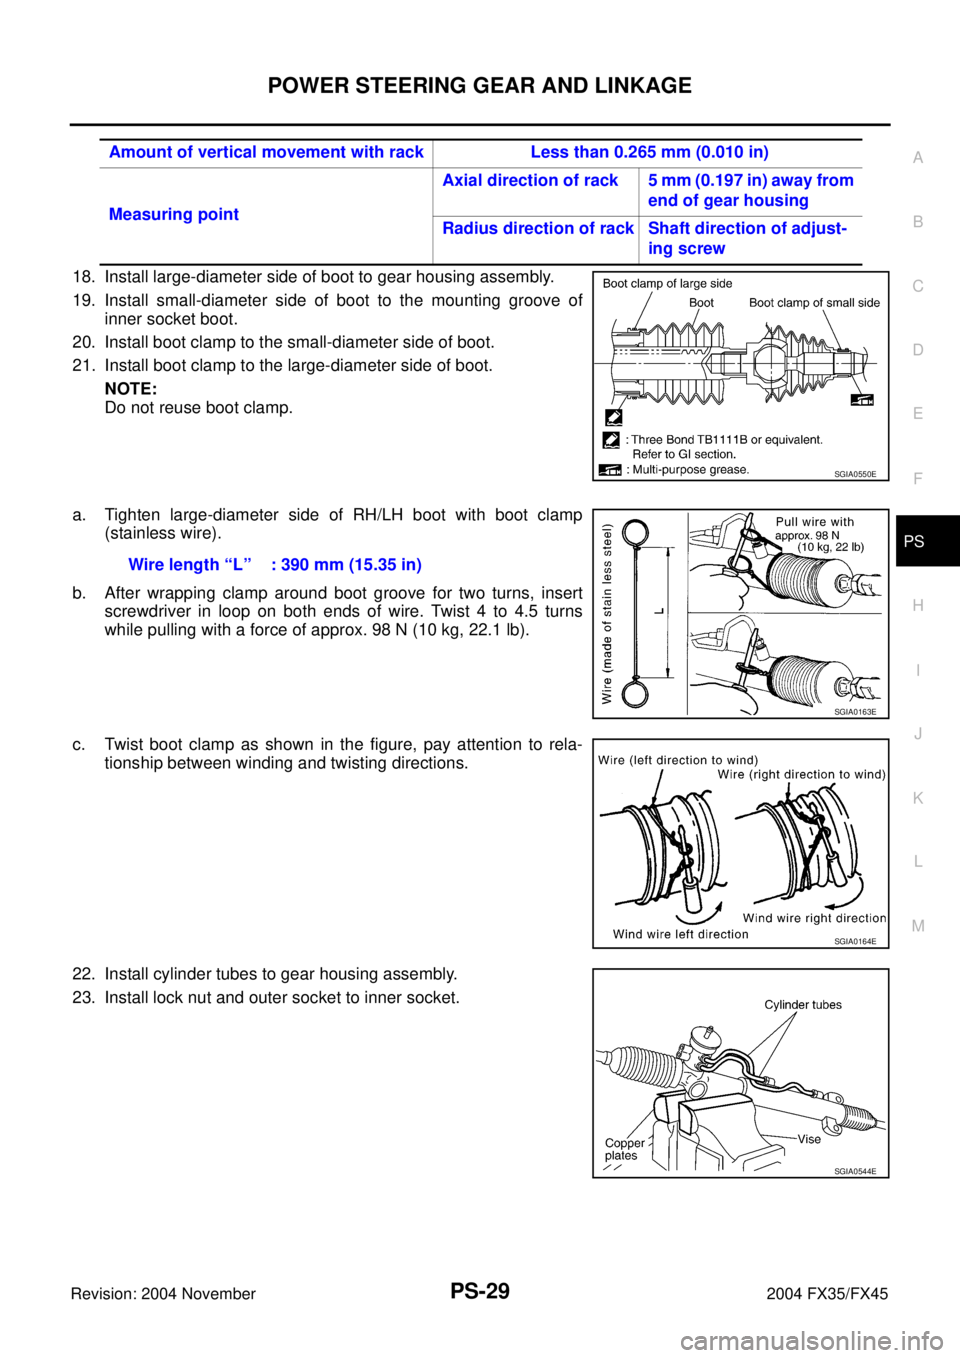 INFINITI FX35 2004  Service Manual POWER STEERING GEAR AND LINKAGE
PS-29
C
D
E
F
H
I
J
K
L
MA
B
PS
Revision: 2004 November 2004 FX35/FX45
18. Install large-diameter side of boot to gear housing assembly.
19. Install small-diameter side